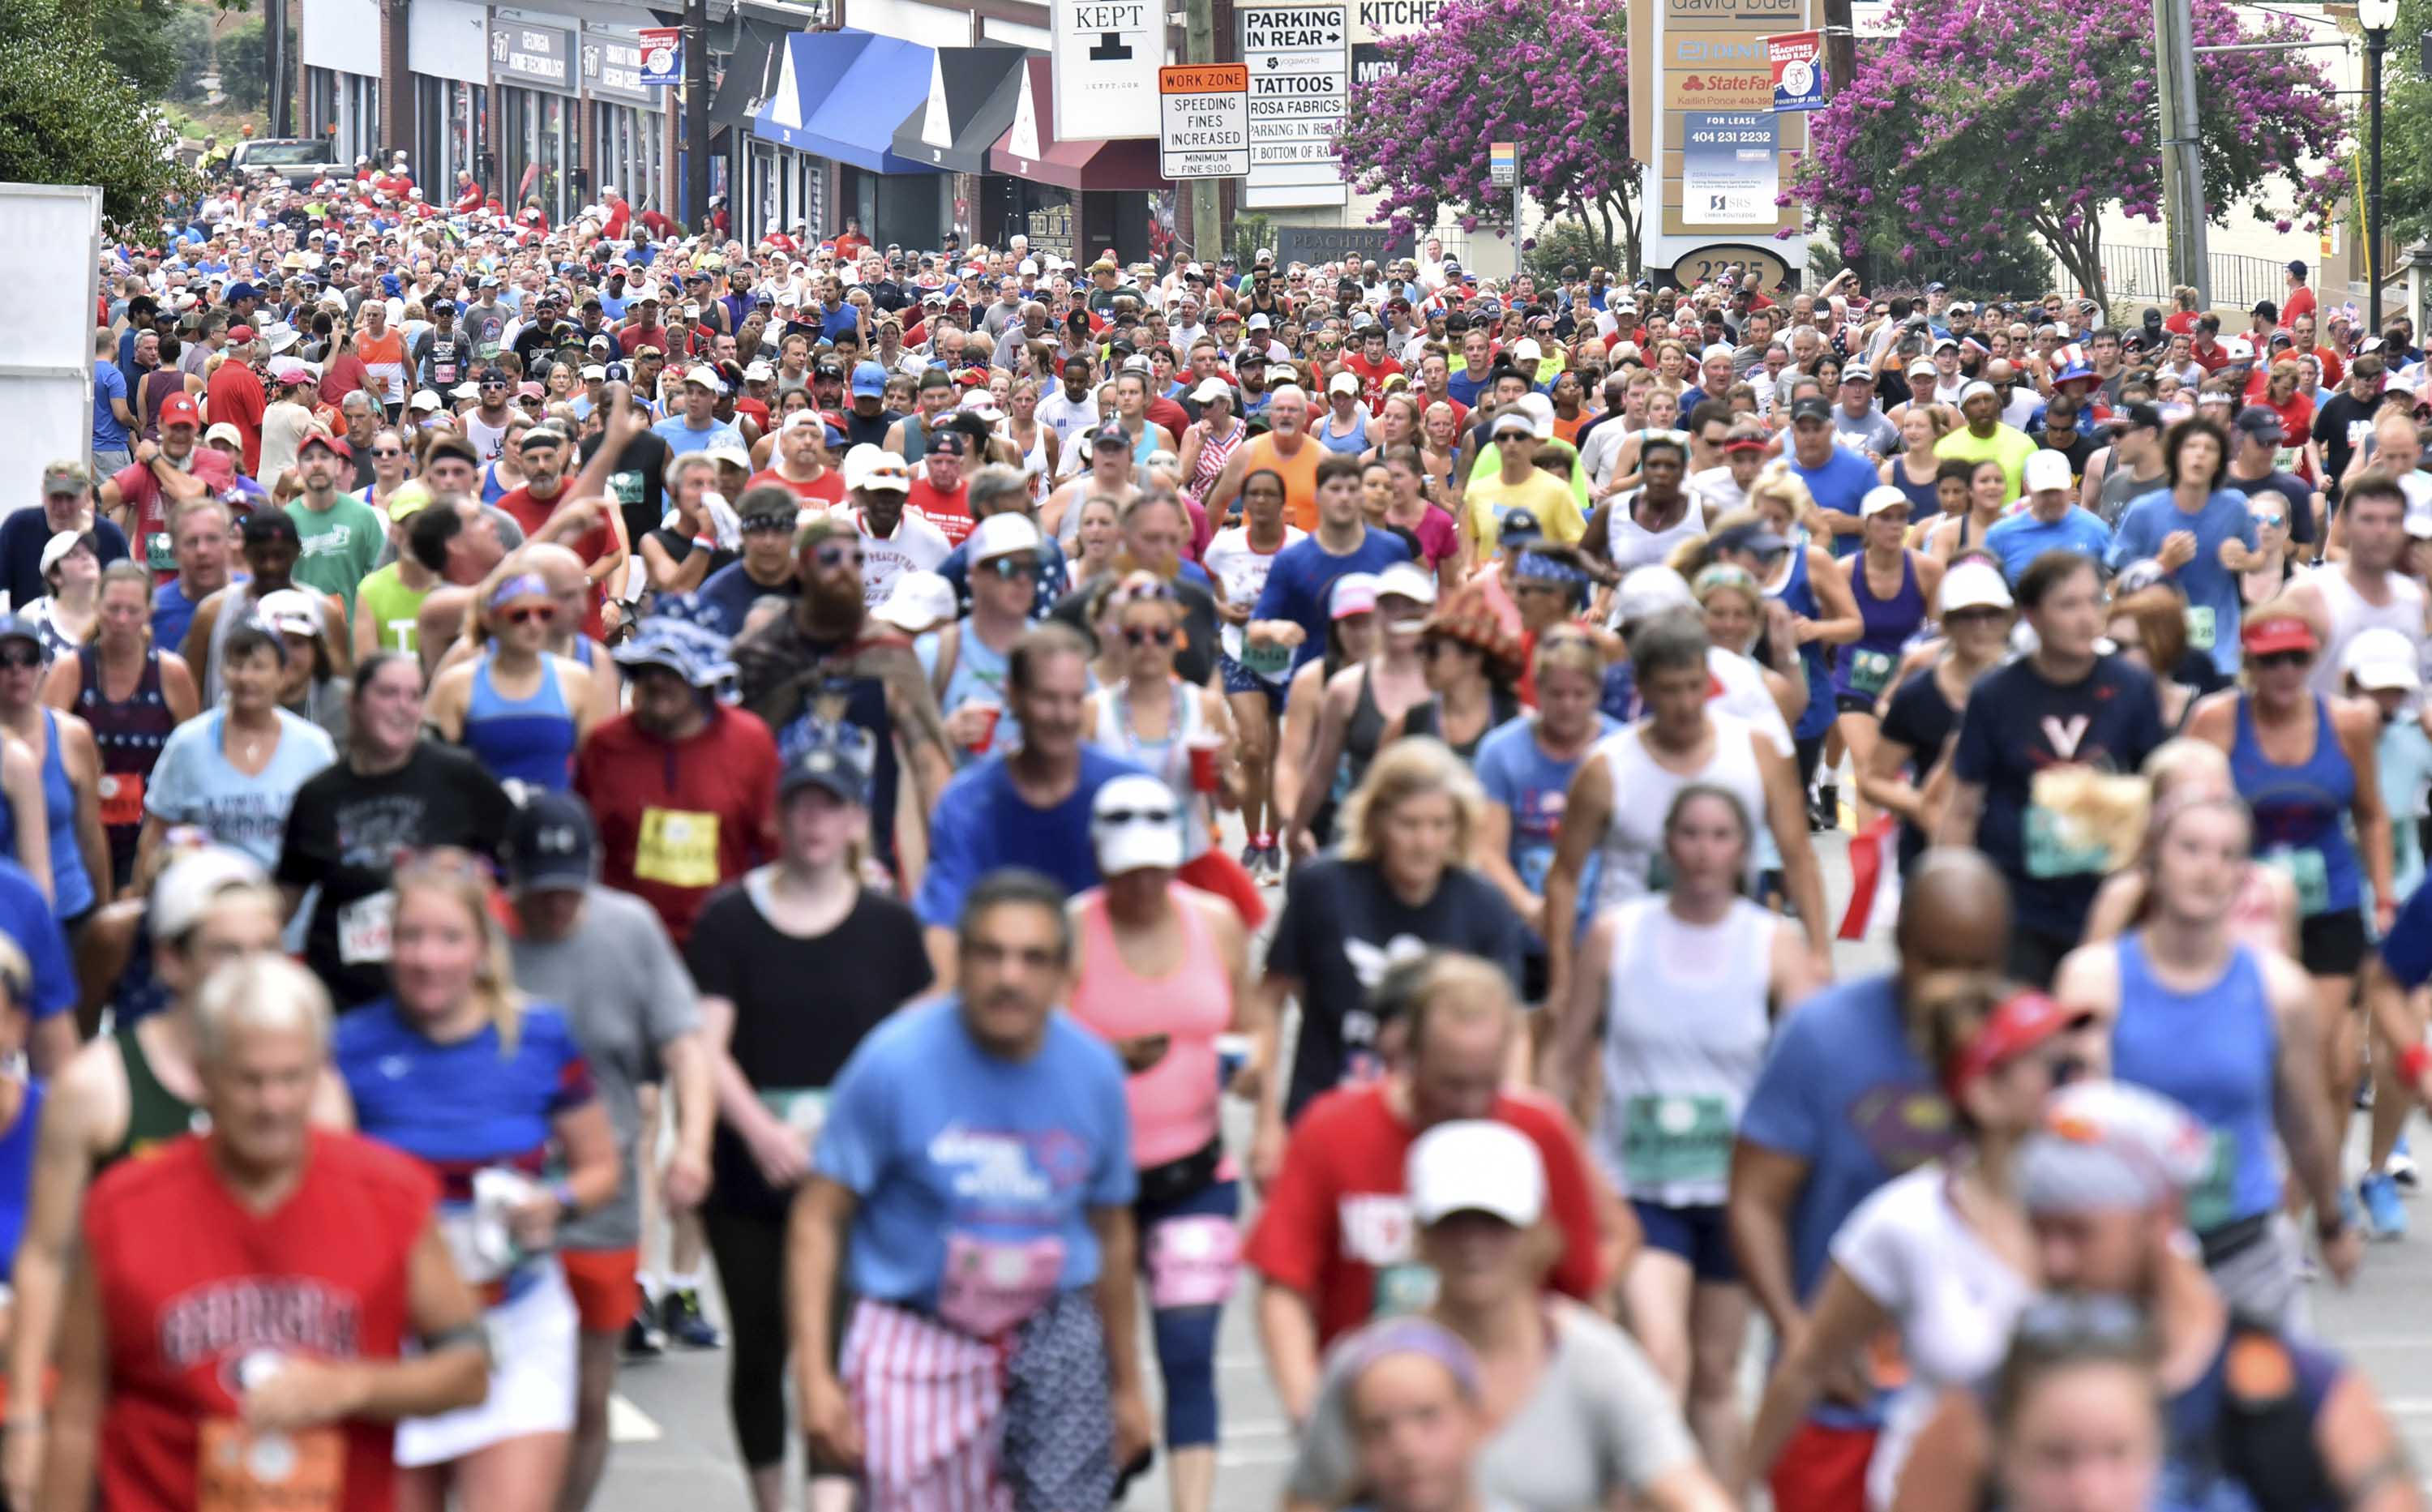 Runners make their way down Peachtree Road during the 50th AJC Peachtree Road Race on July 4, 2019.